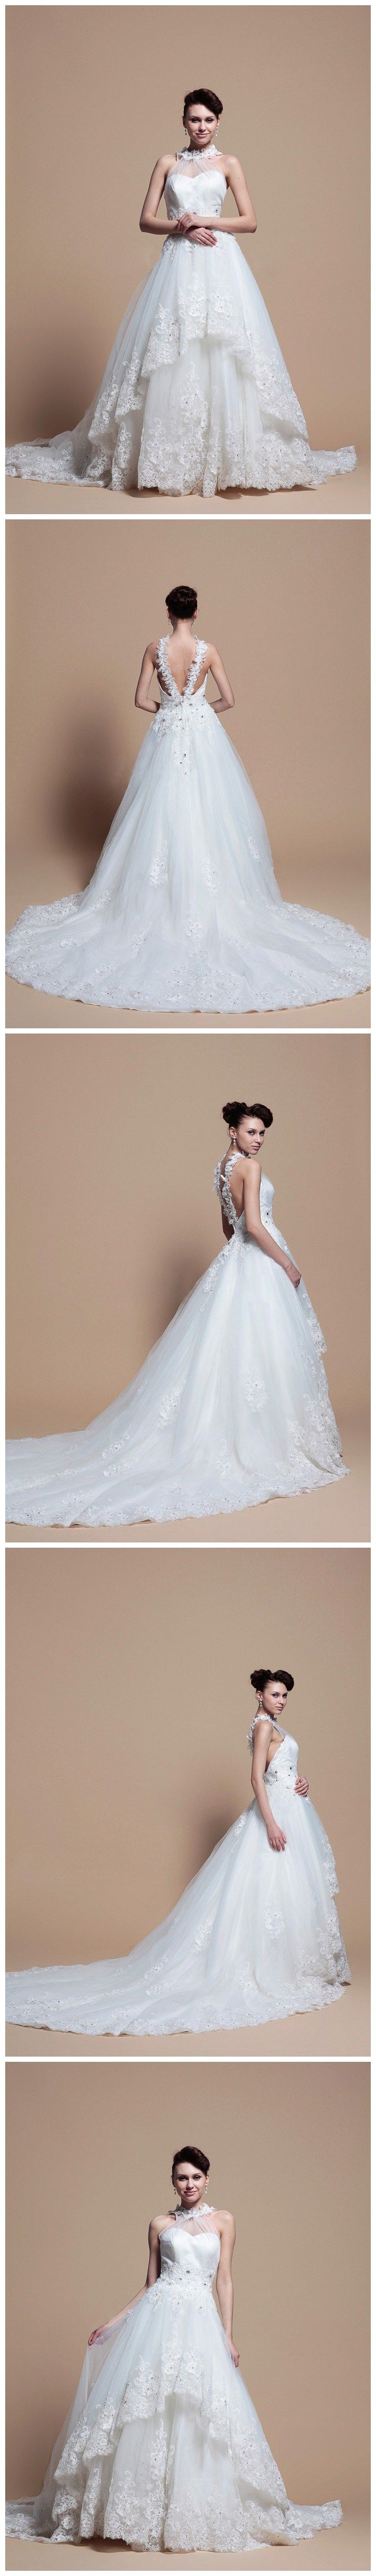 Princess Halter Neck With Two Layer Wedding Dress